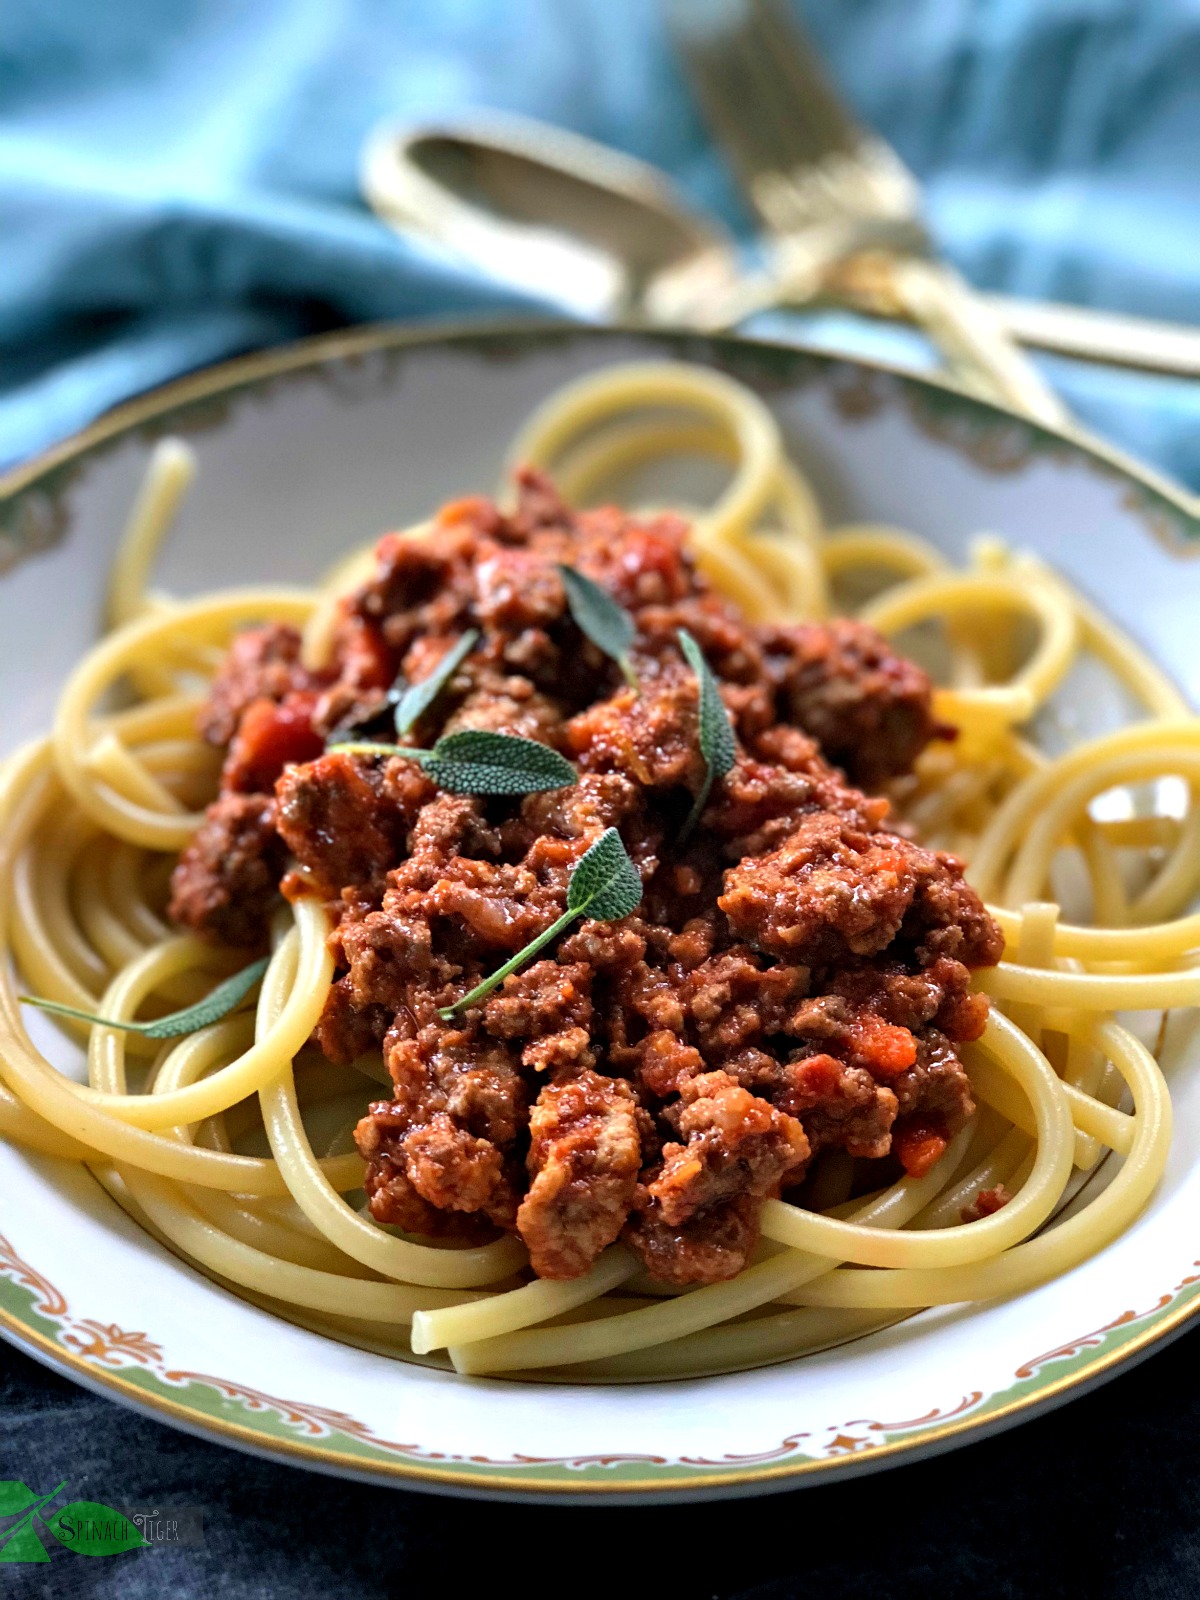 Easy Spaghetti Bolognese Recipe with Pork, Apple, Sage from Spinach TIger